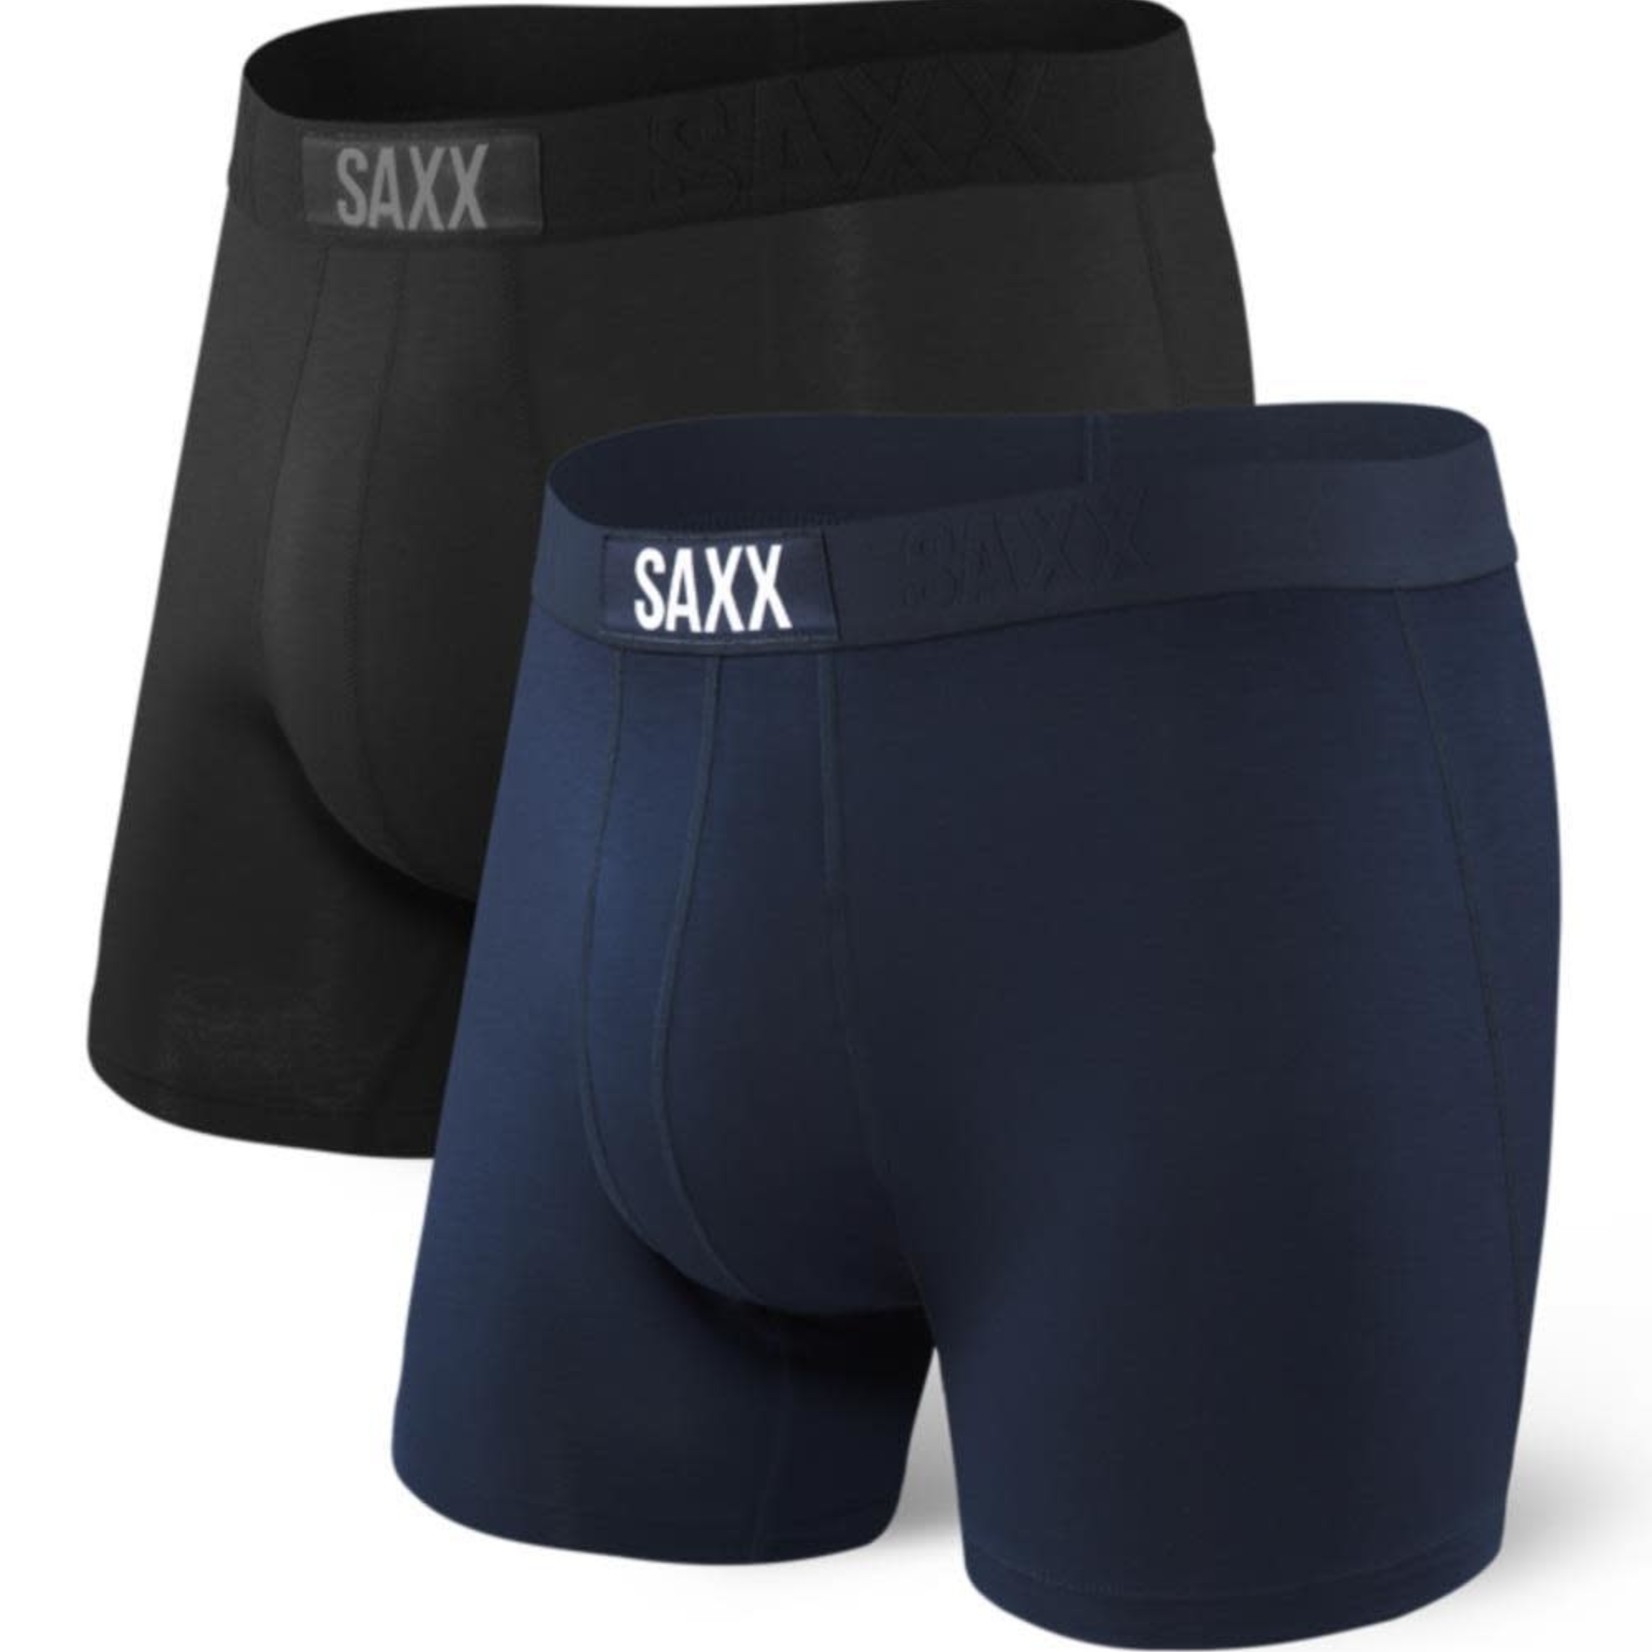 SAXX SAXX 's "Black / Navy" Two Pack Vibe Boxer Brief